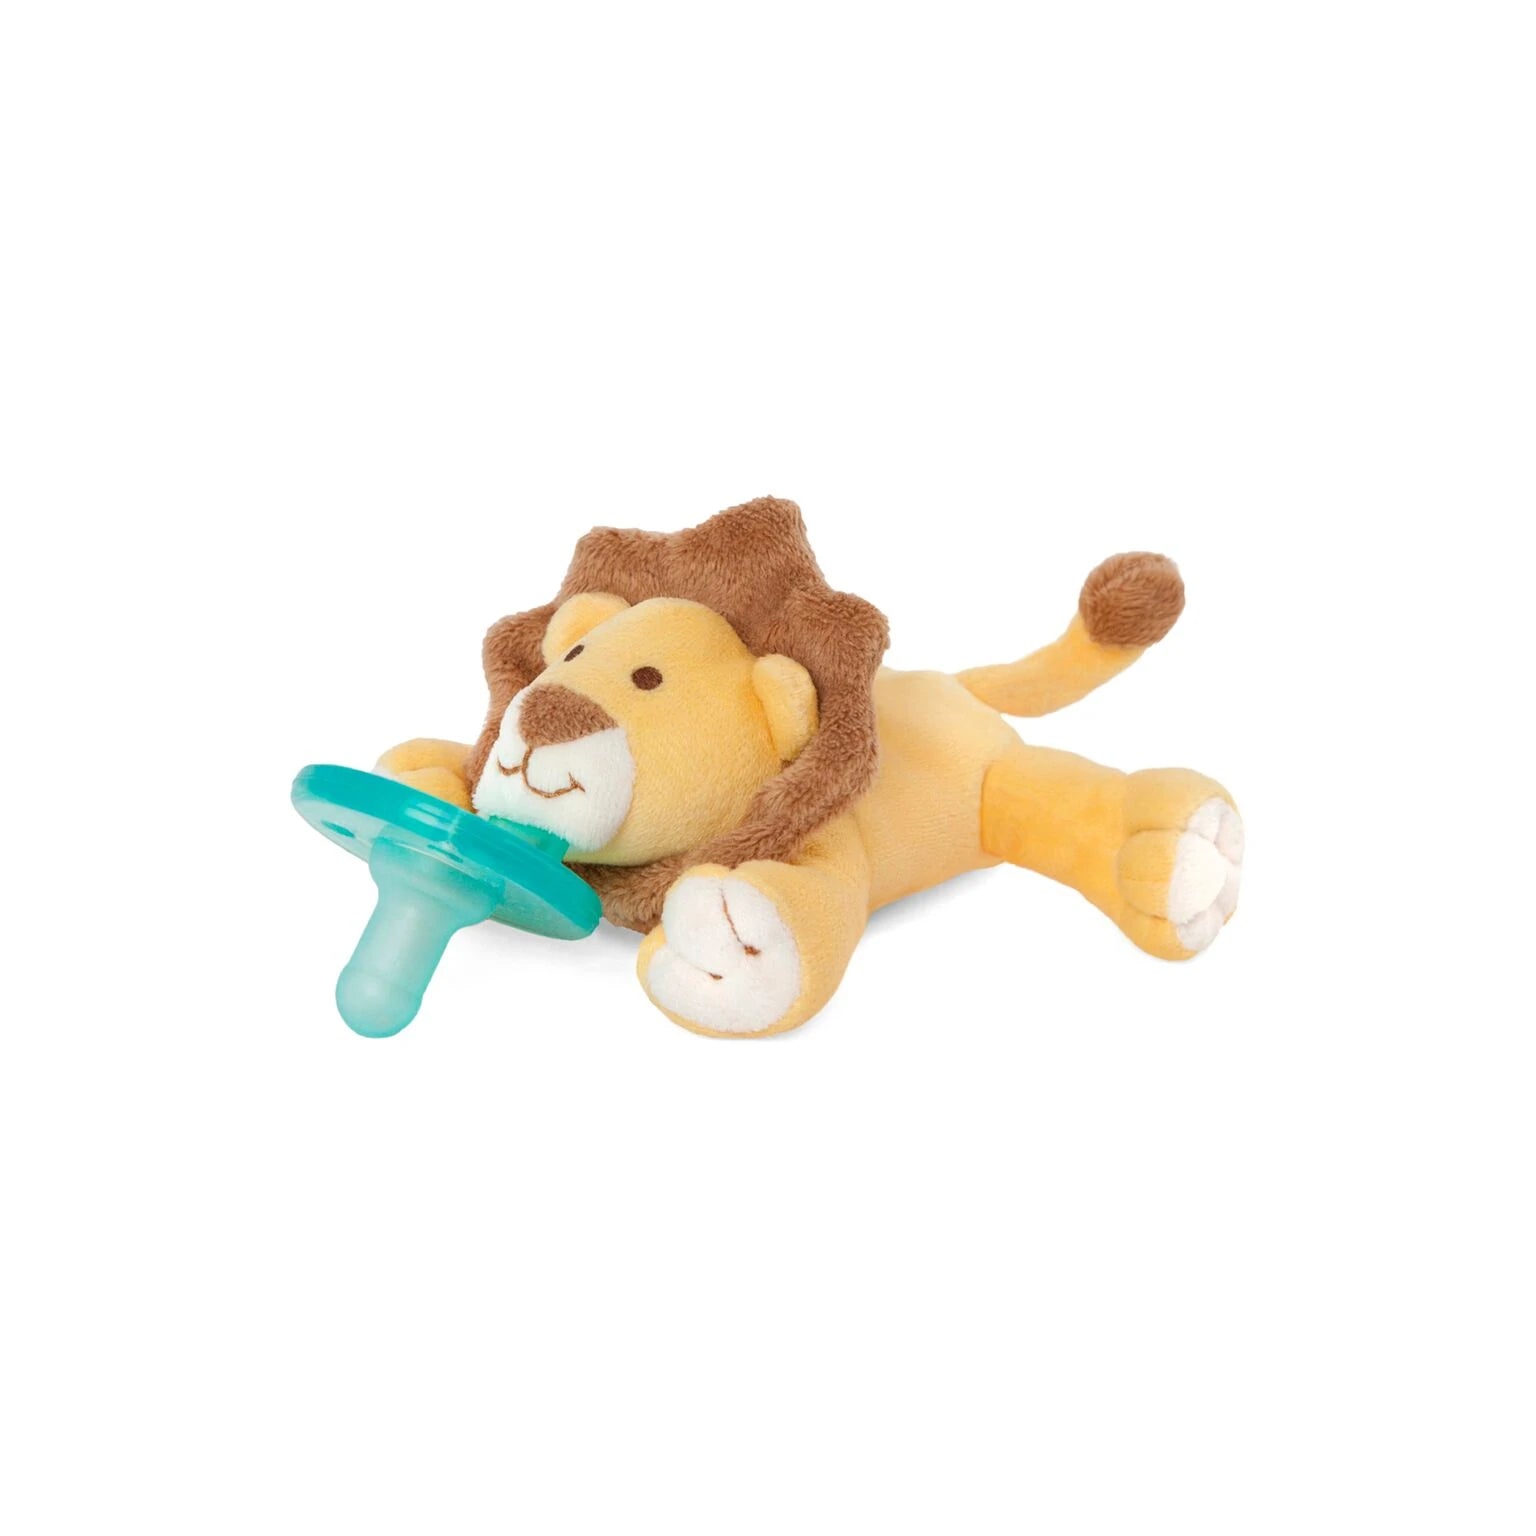 Sensory Pacifier & Teether Holder with Silicone Pacifier - BambiniJO | Buy Online | Jordan